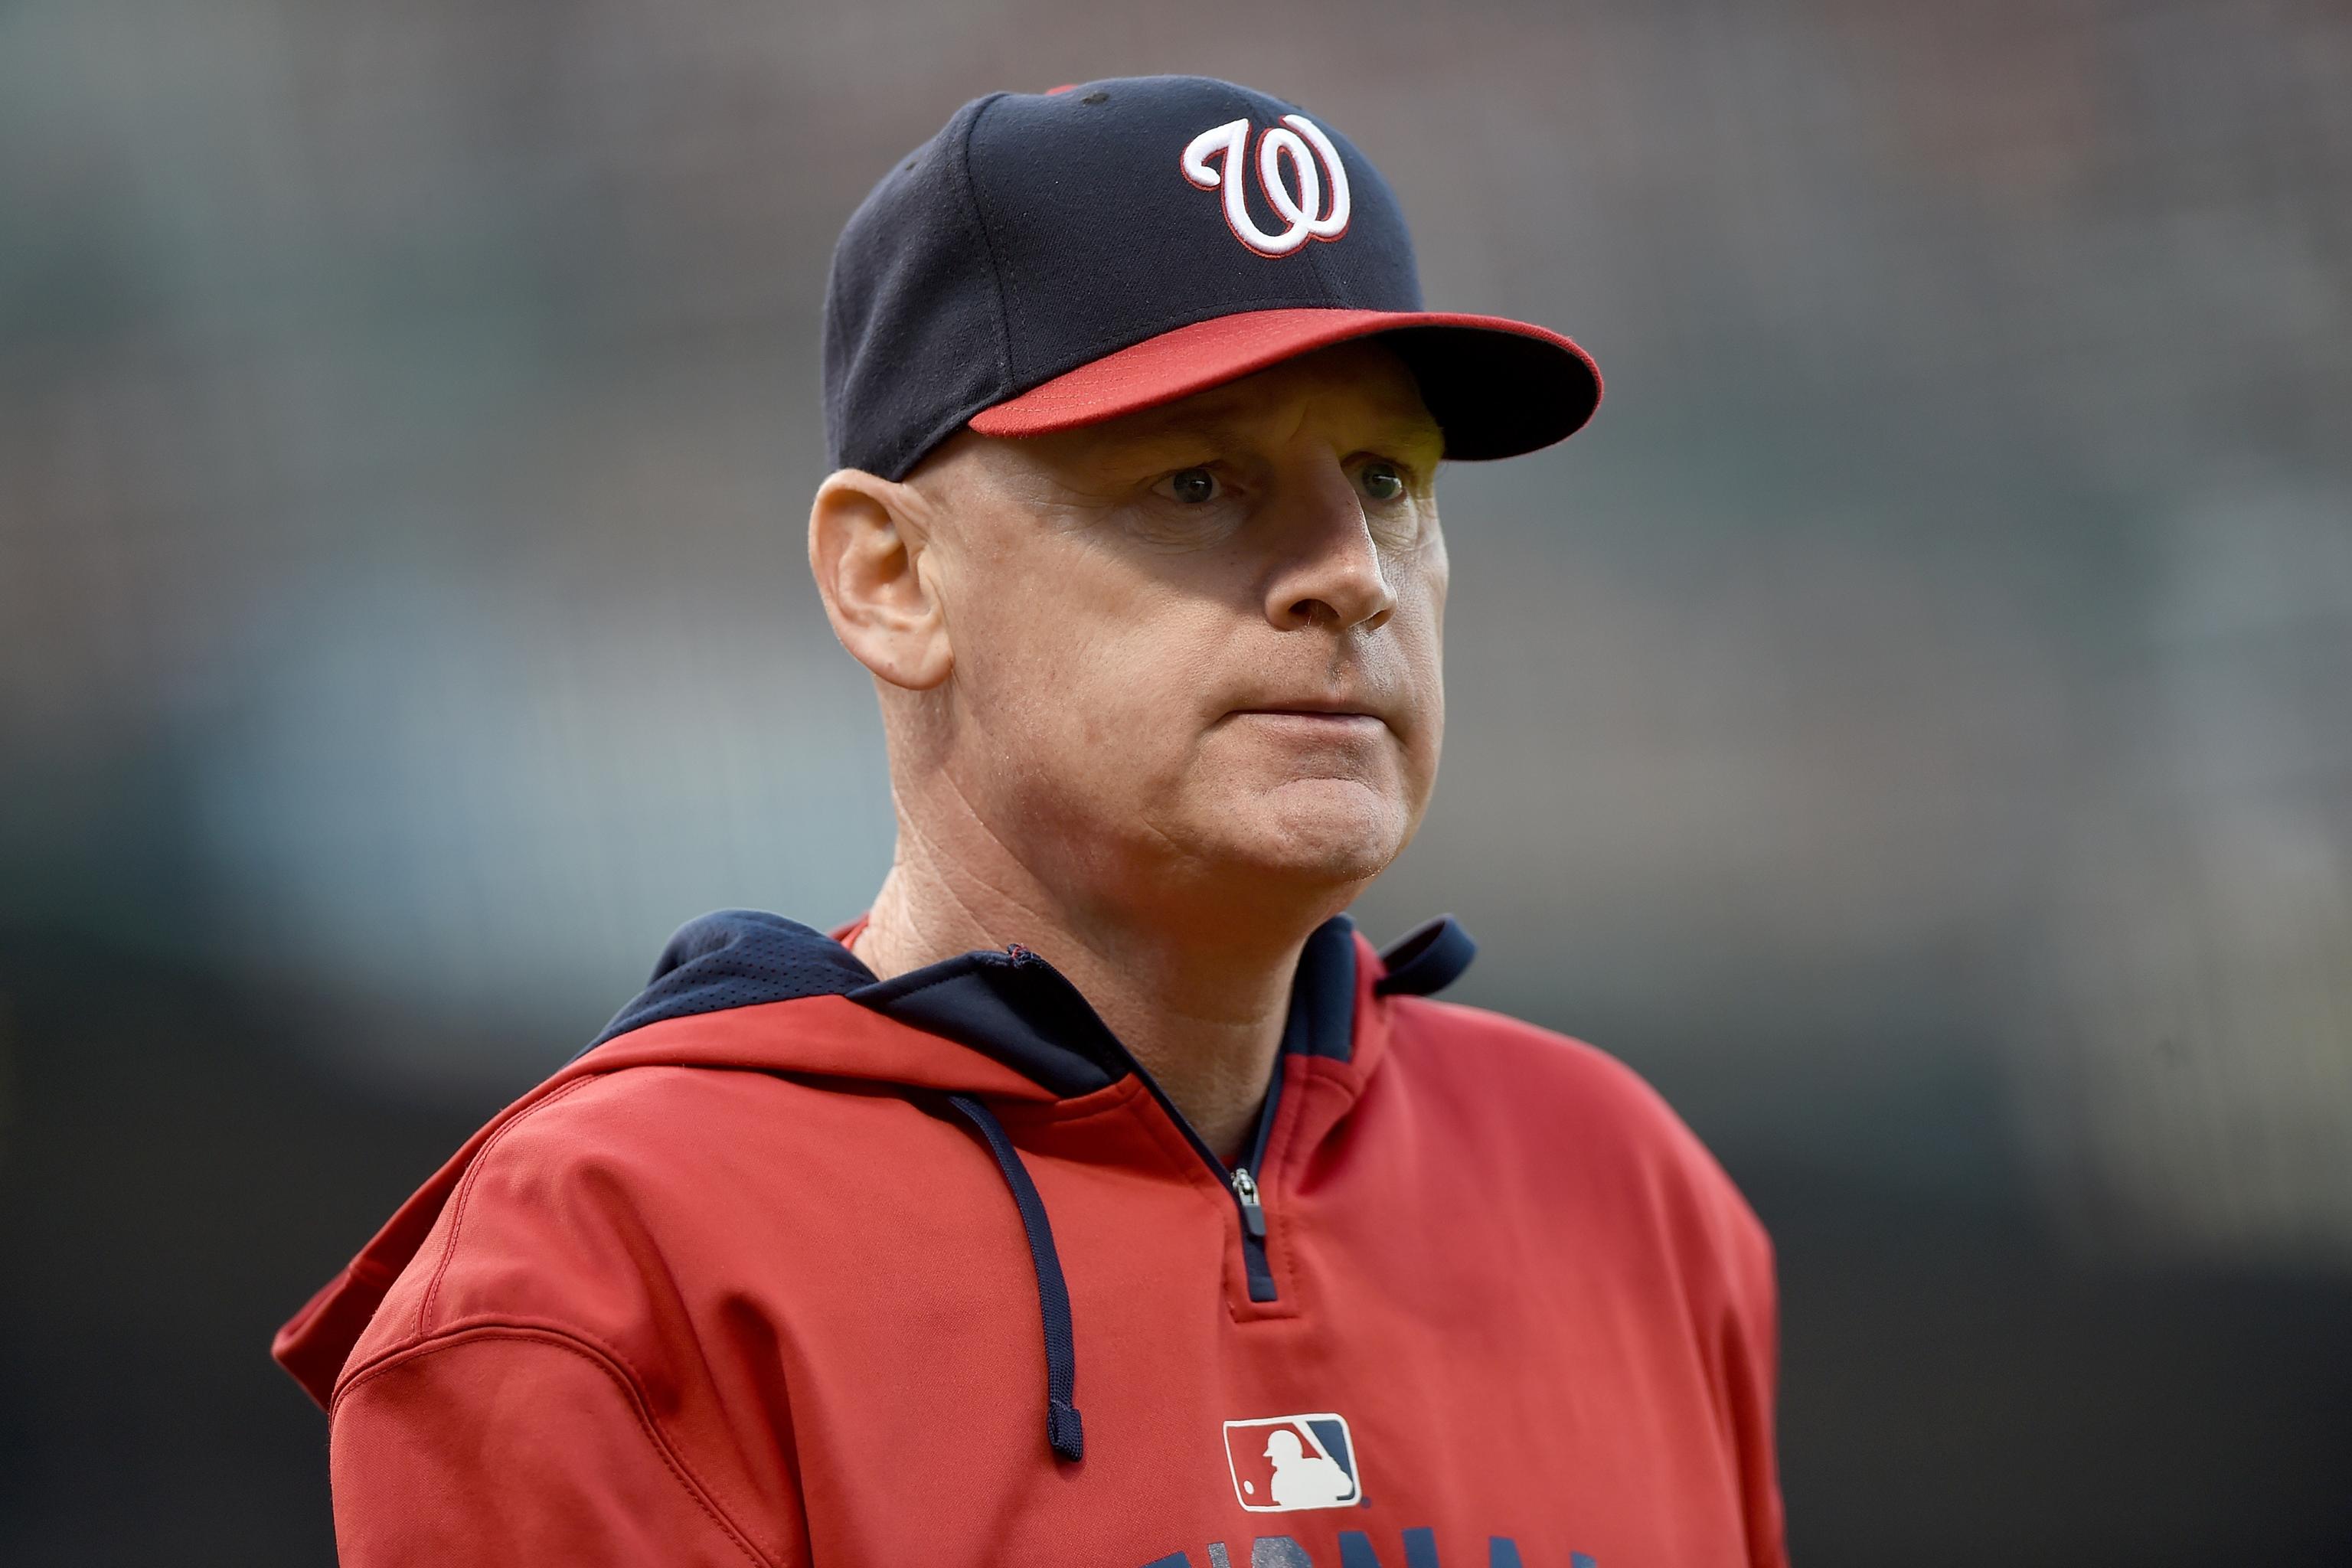 Why those Nats fans booed Matt Williams at his press conference